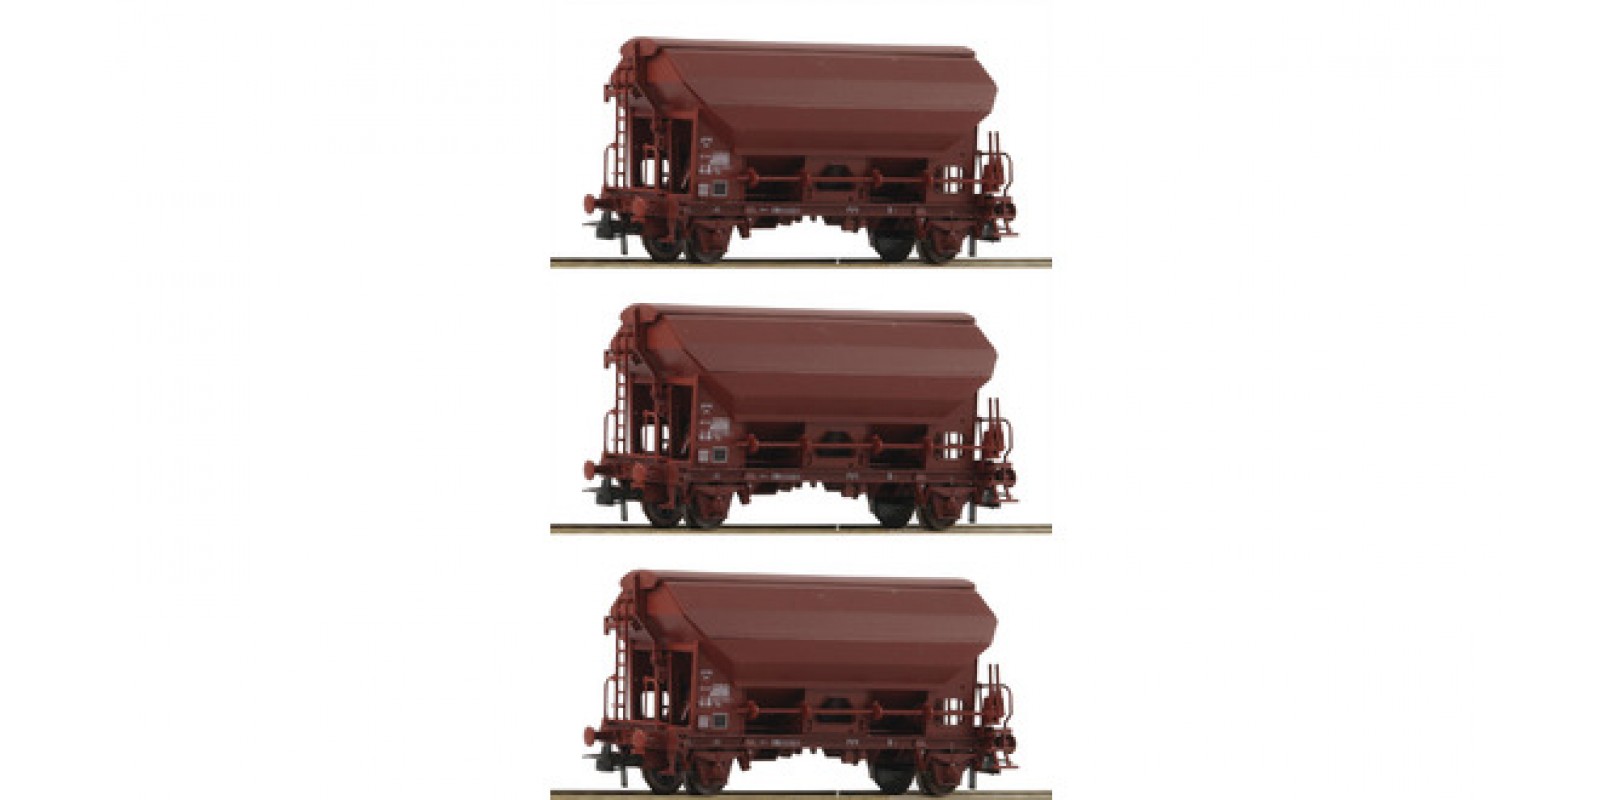 RO76176 - 3 piece set: Swing roof wagons, SNCB